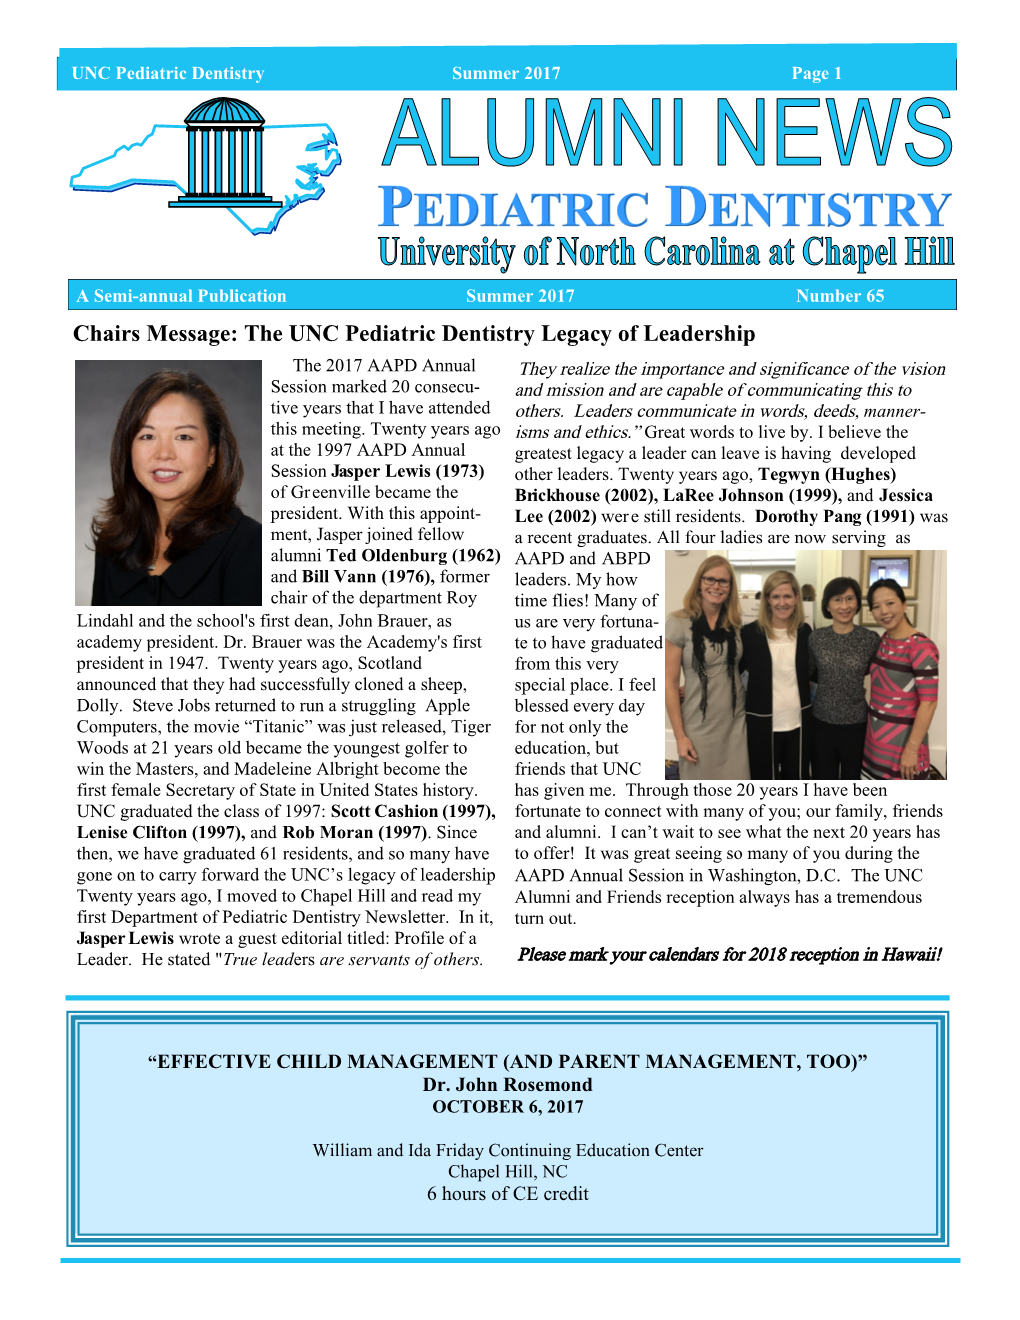 Chairs Message: the UNC Pediatric Dentistry Legacy of Leadership